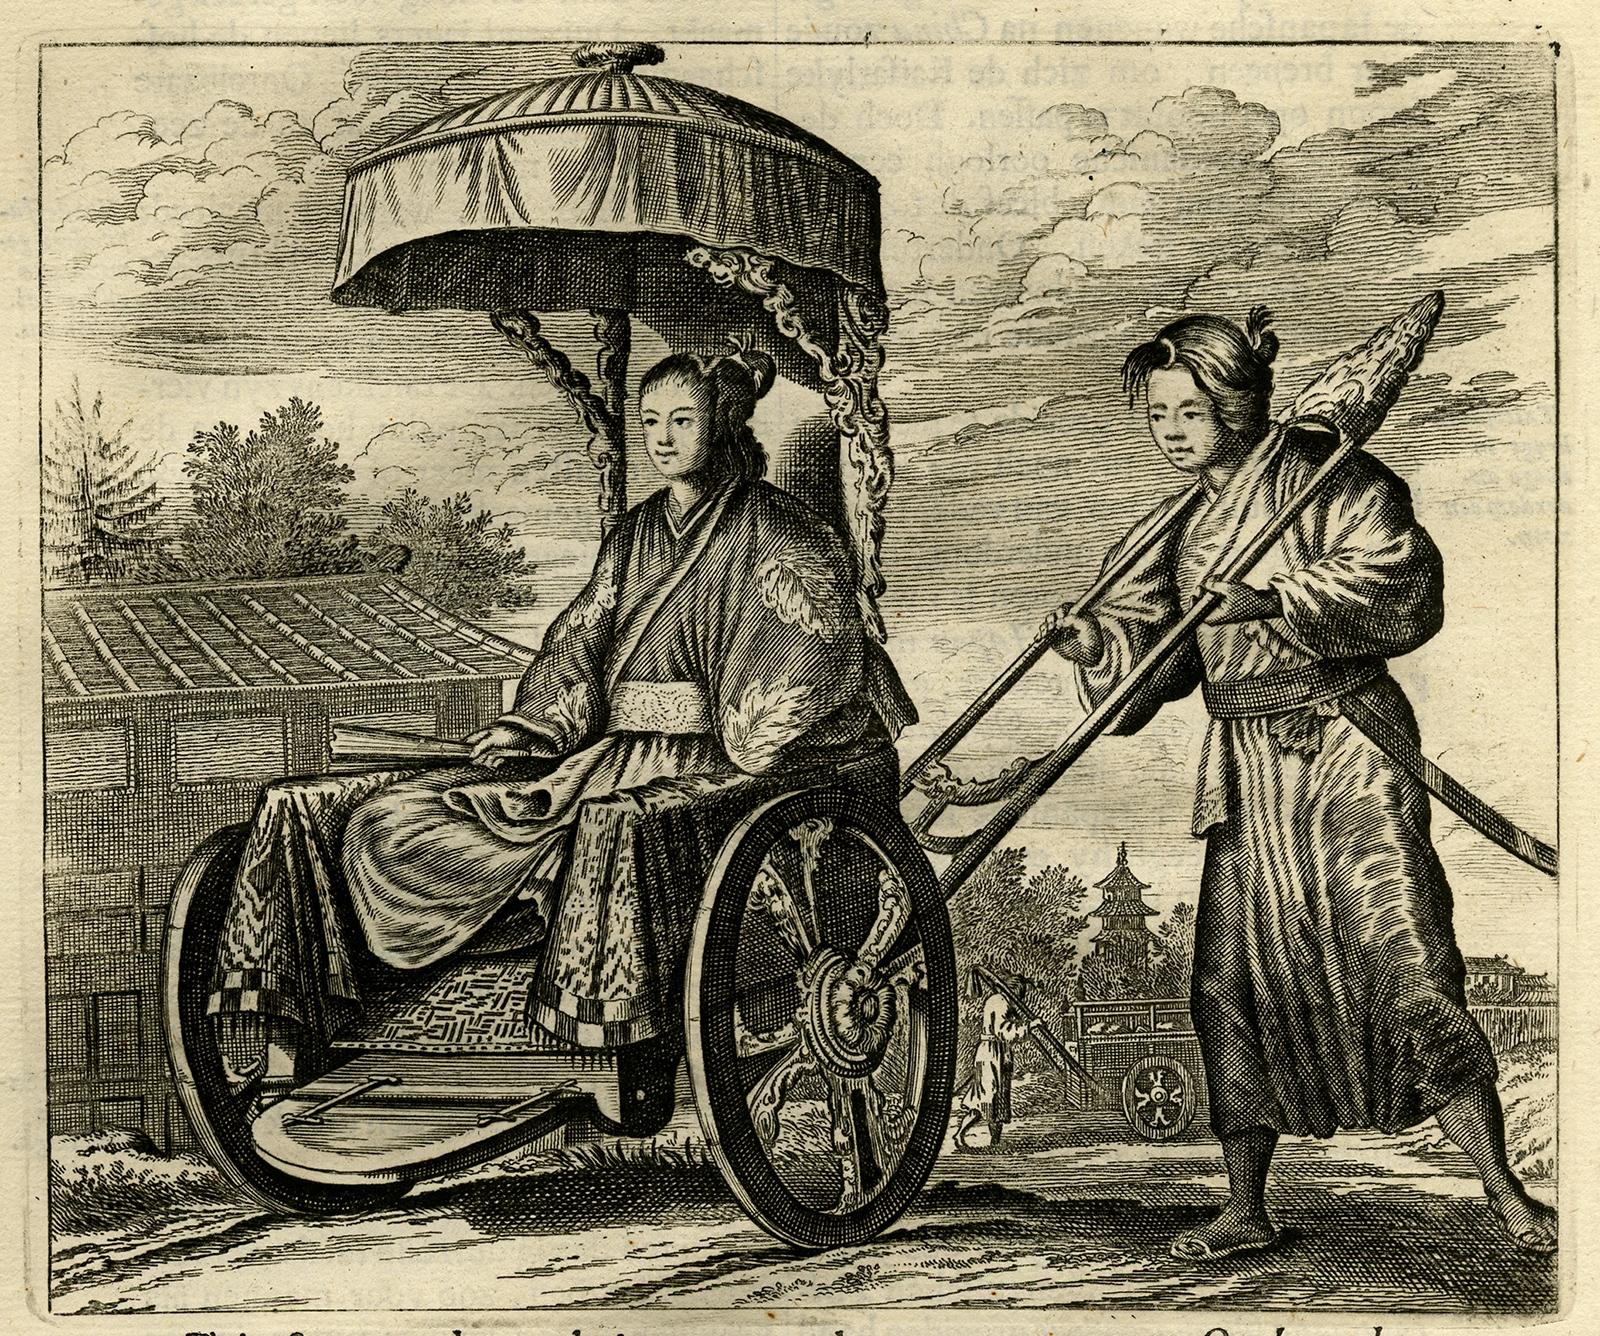 Untitled antique print of a Japanese noblewoman transported in a pushed rickshaw or jinrikisha. 

This print originates from Arnoldus Montanus' 